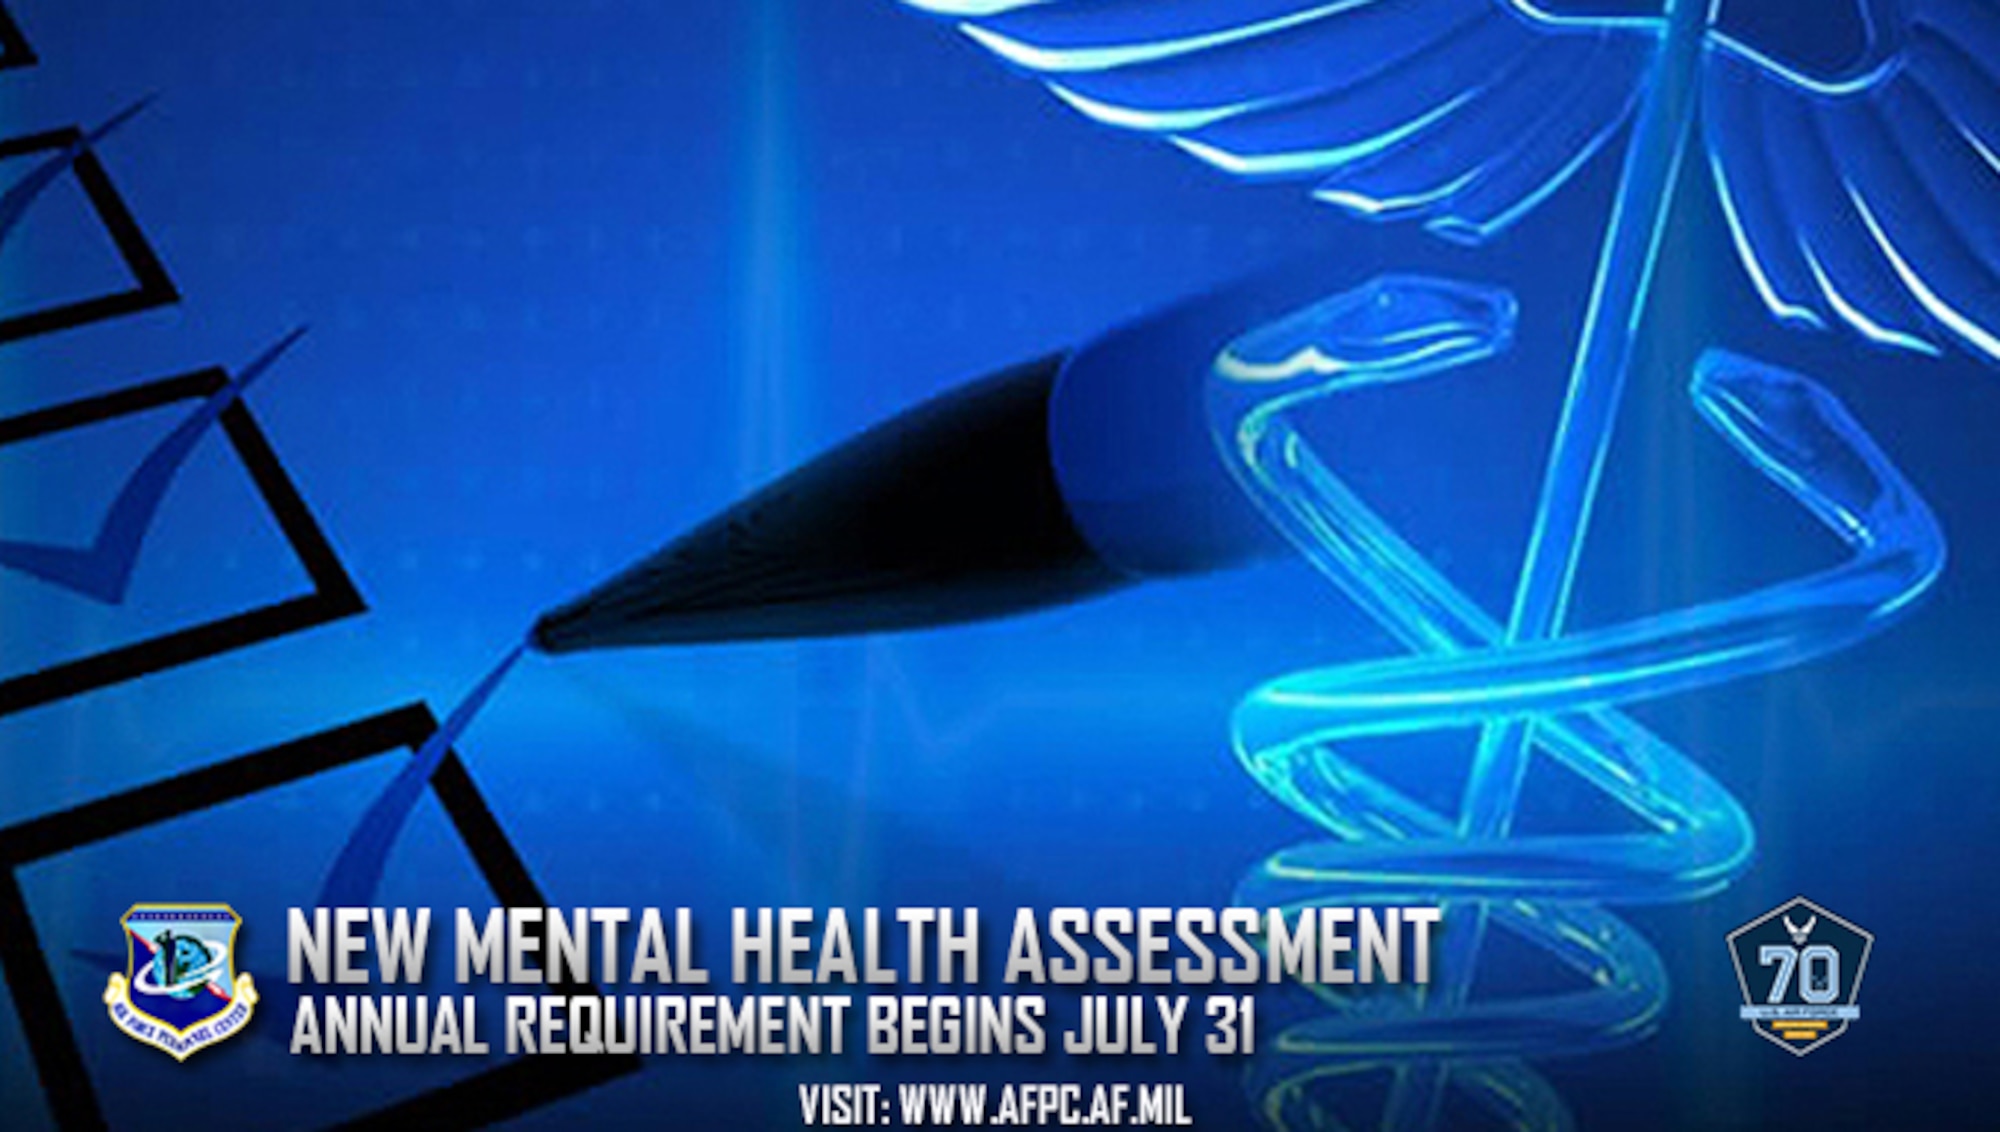 New annual Mental Health Assessment requirement begins July 31. (U.S. Air Force courtesy graphic)